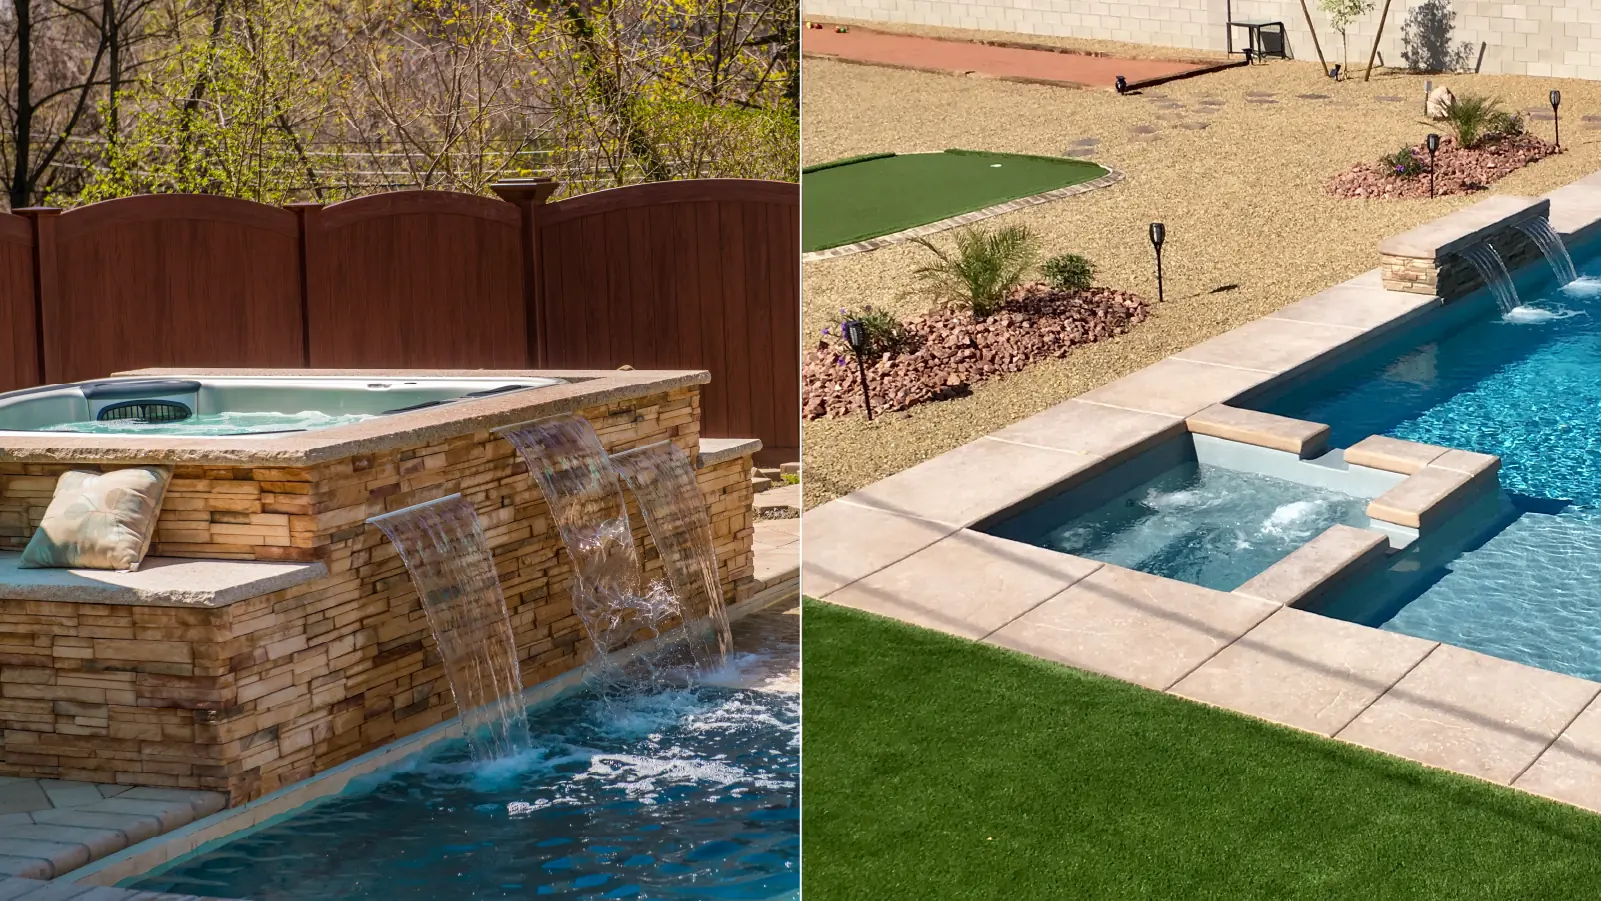 A Comparative Look at Fiberglass Pools with Spas Versus Stand-Alone Spas